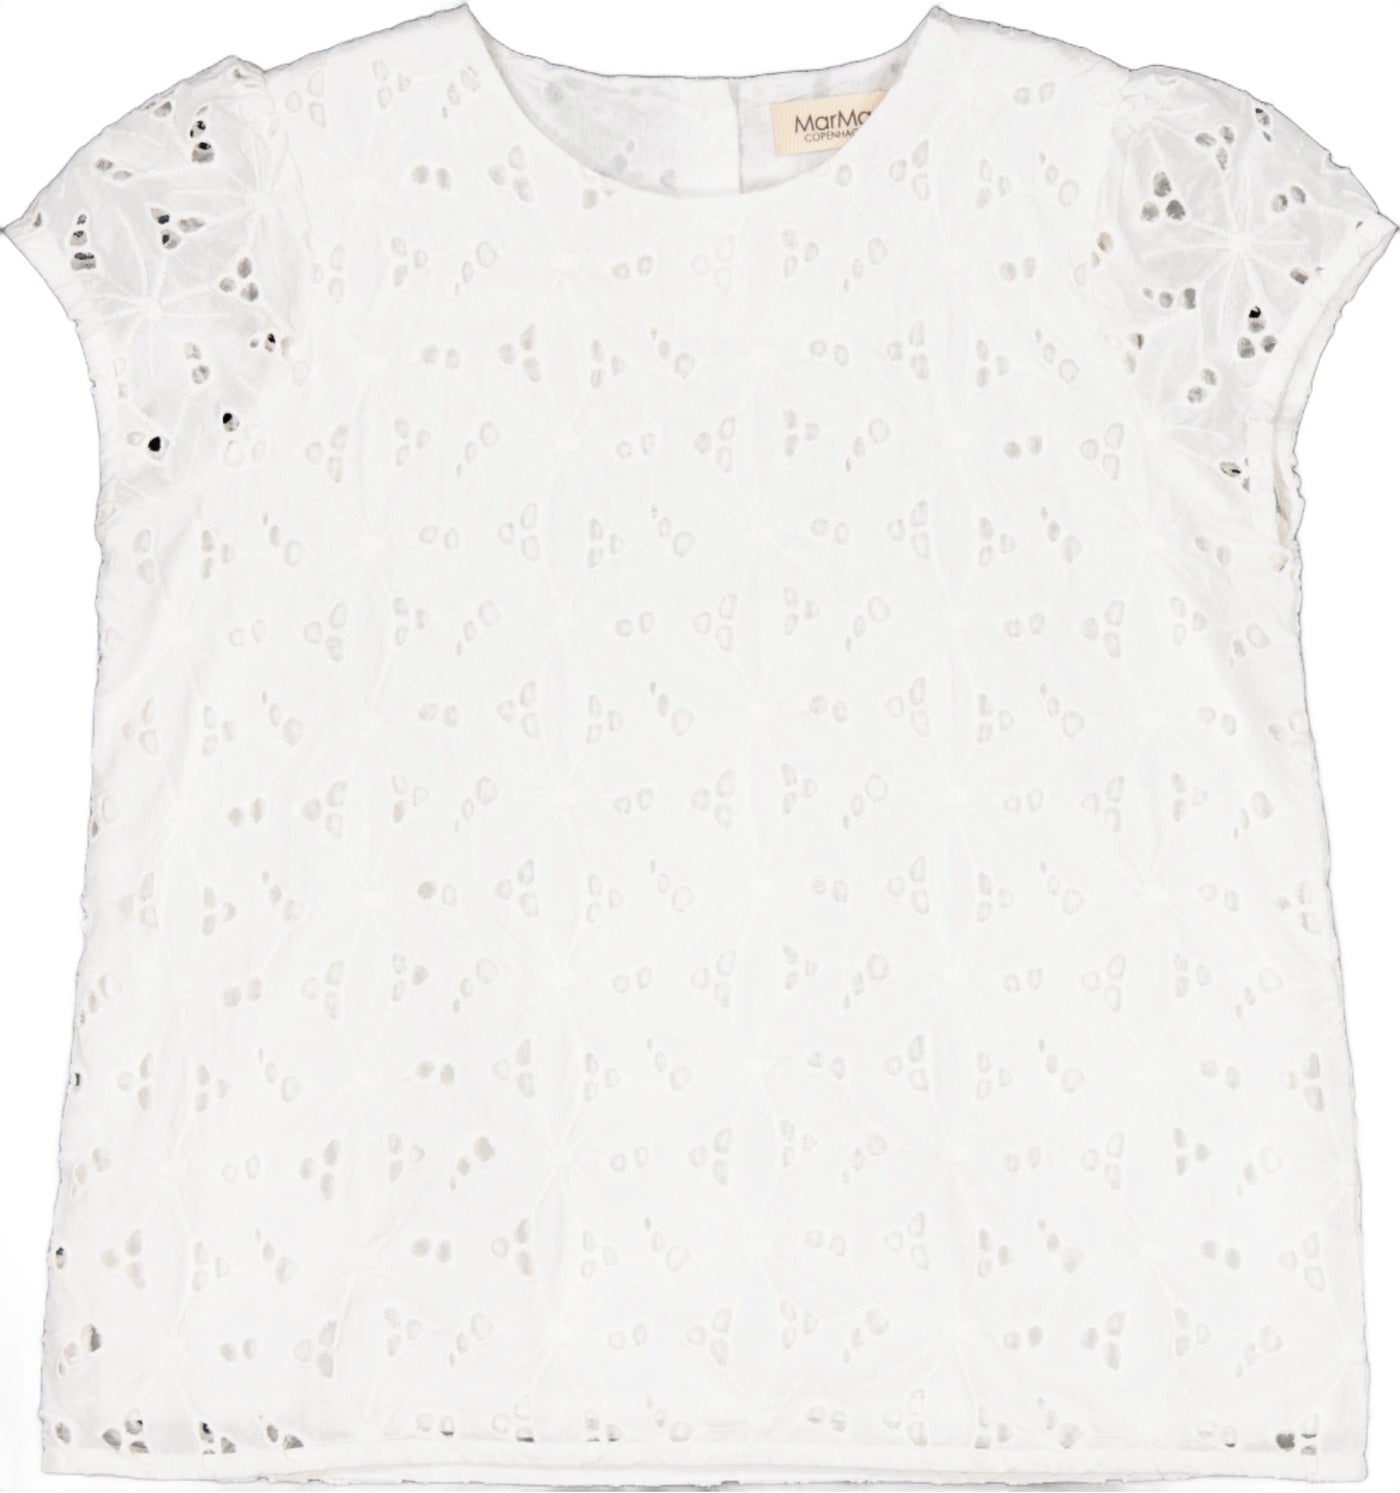 Tussa Broderie Anglaise Top